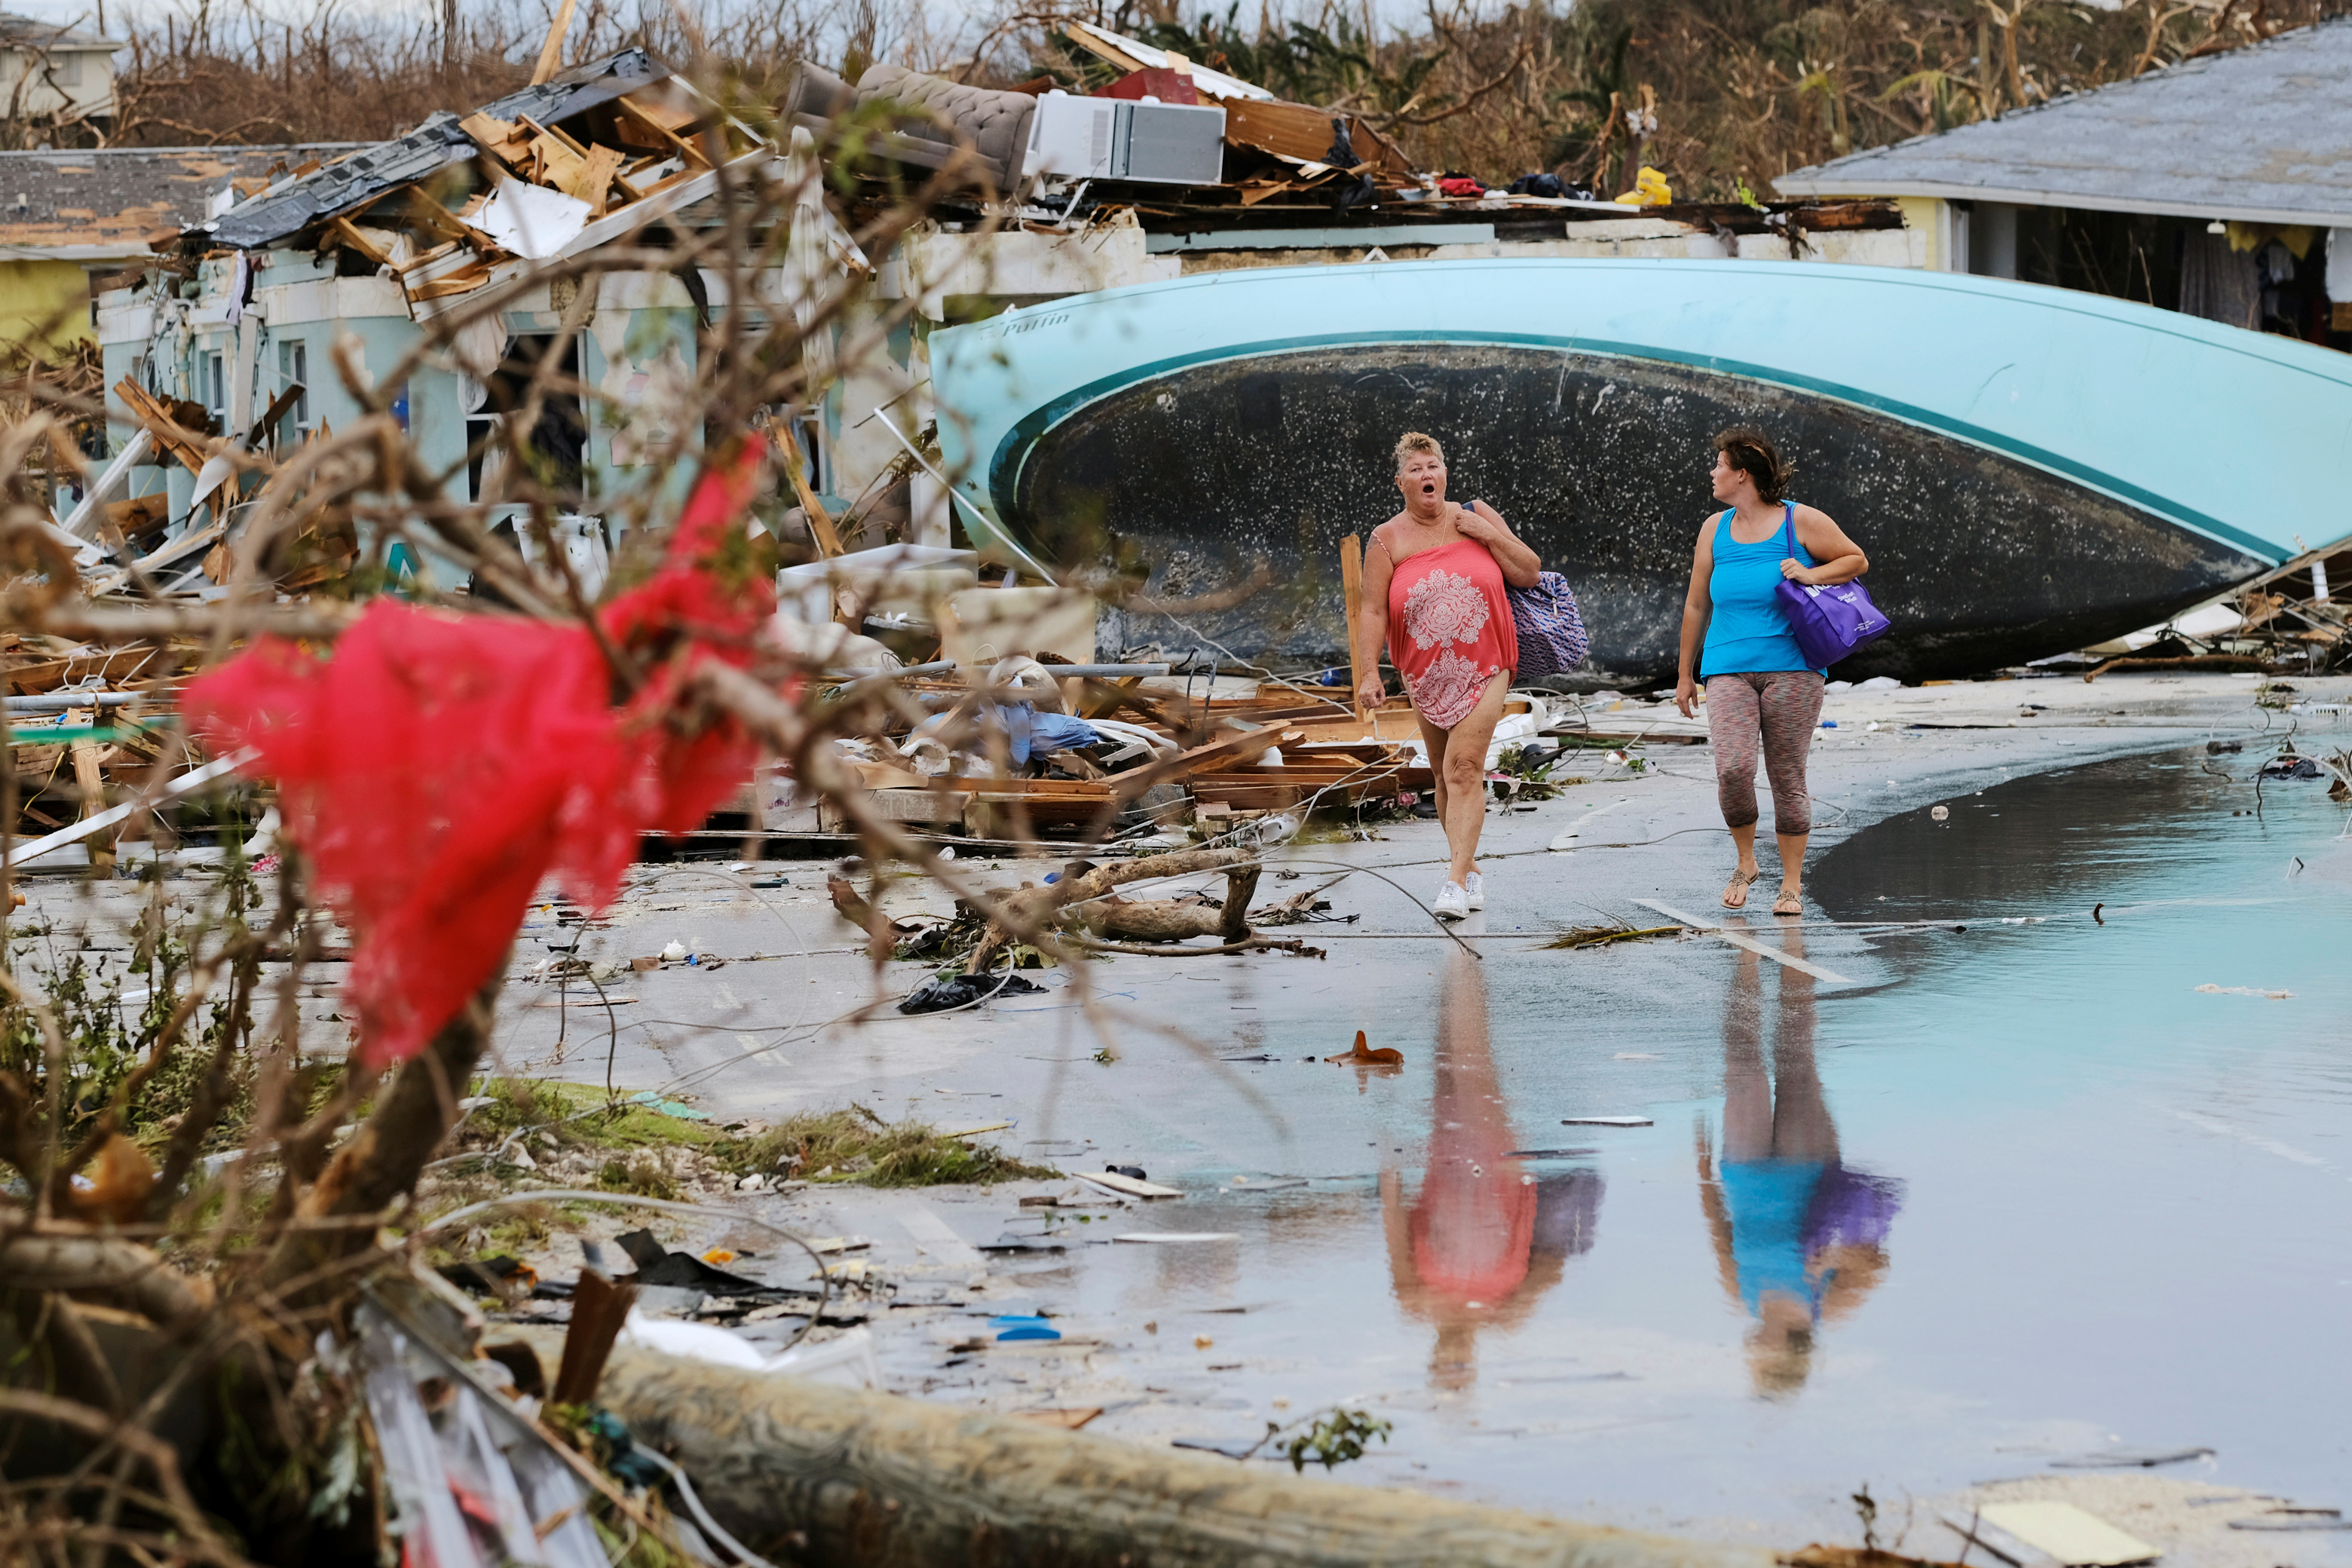 Women walk through the rubble in the aftermath of Hurricane Dorian on the Great Abaco island town of Marsh Harbour